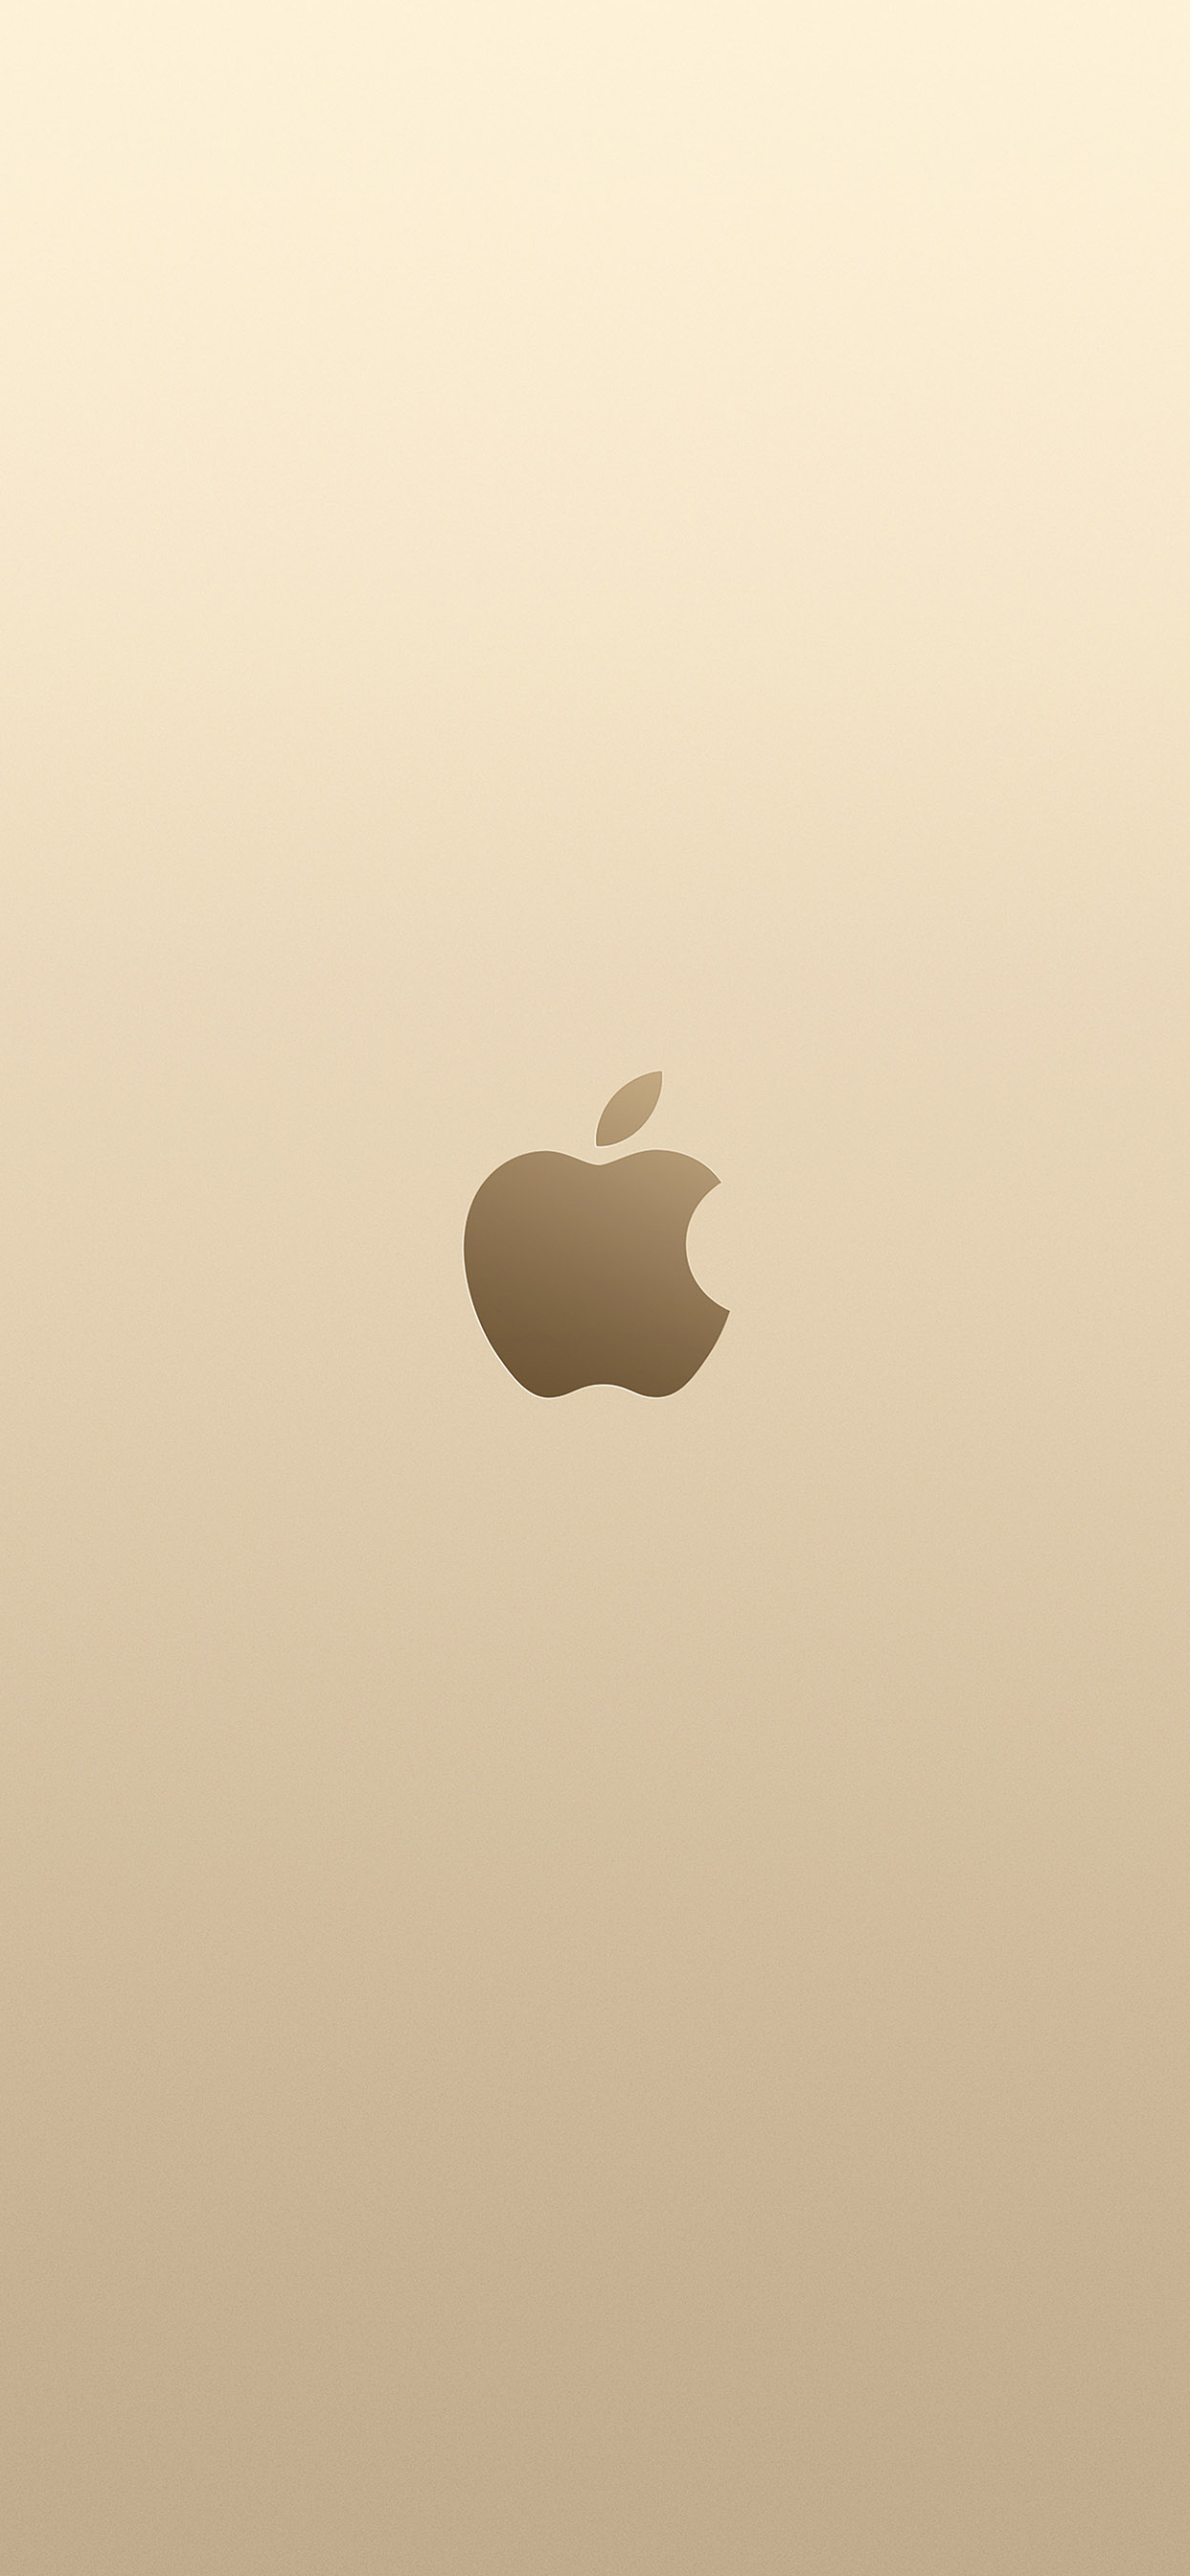 Gold Inspired Wallpaper For IPad And IPhone XS Max